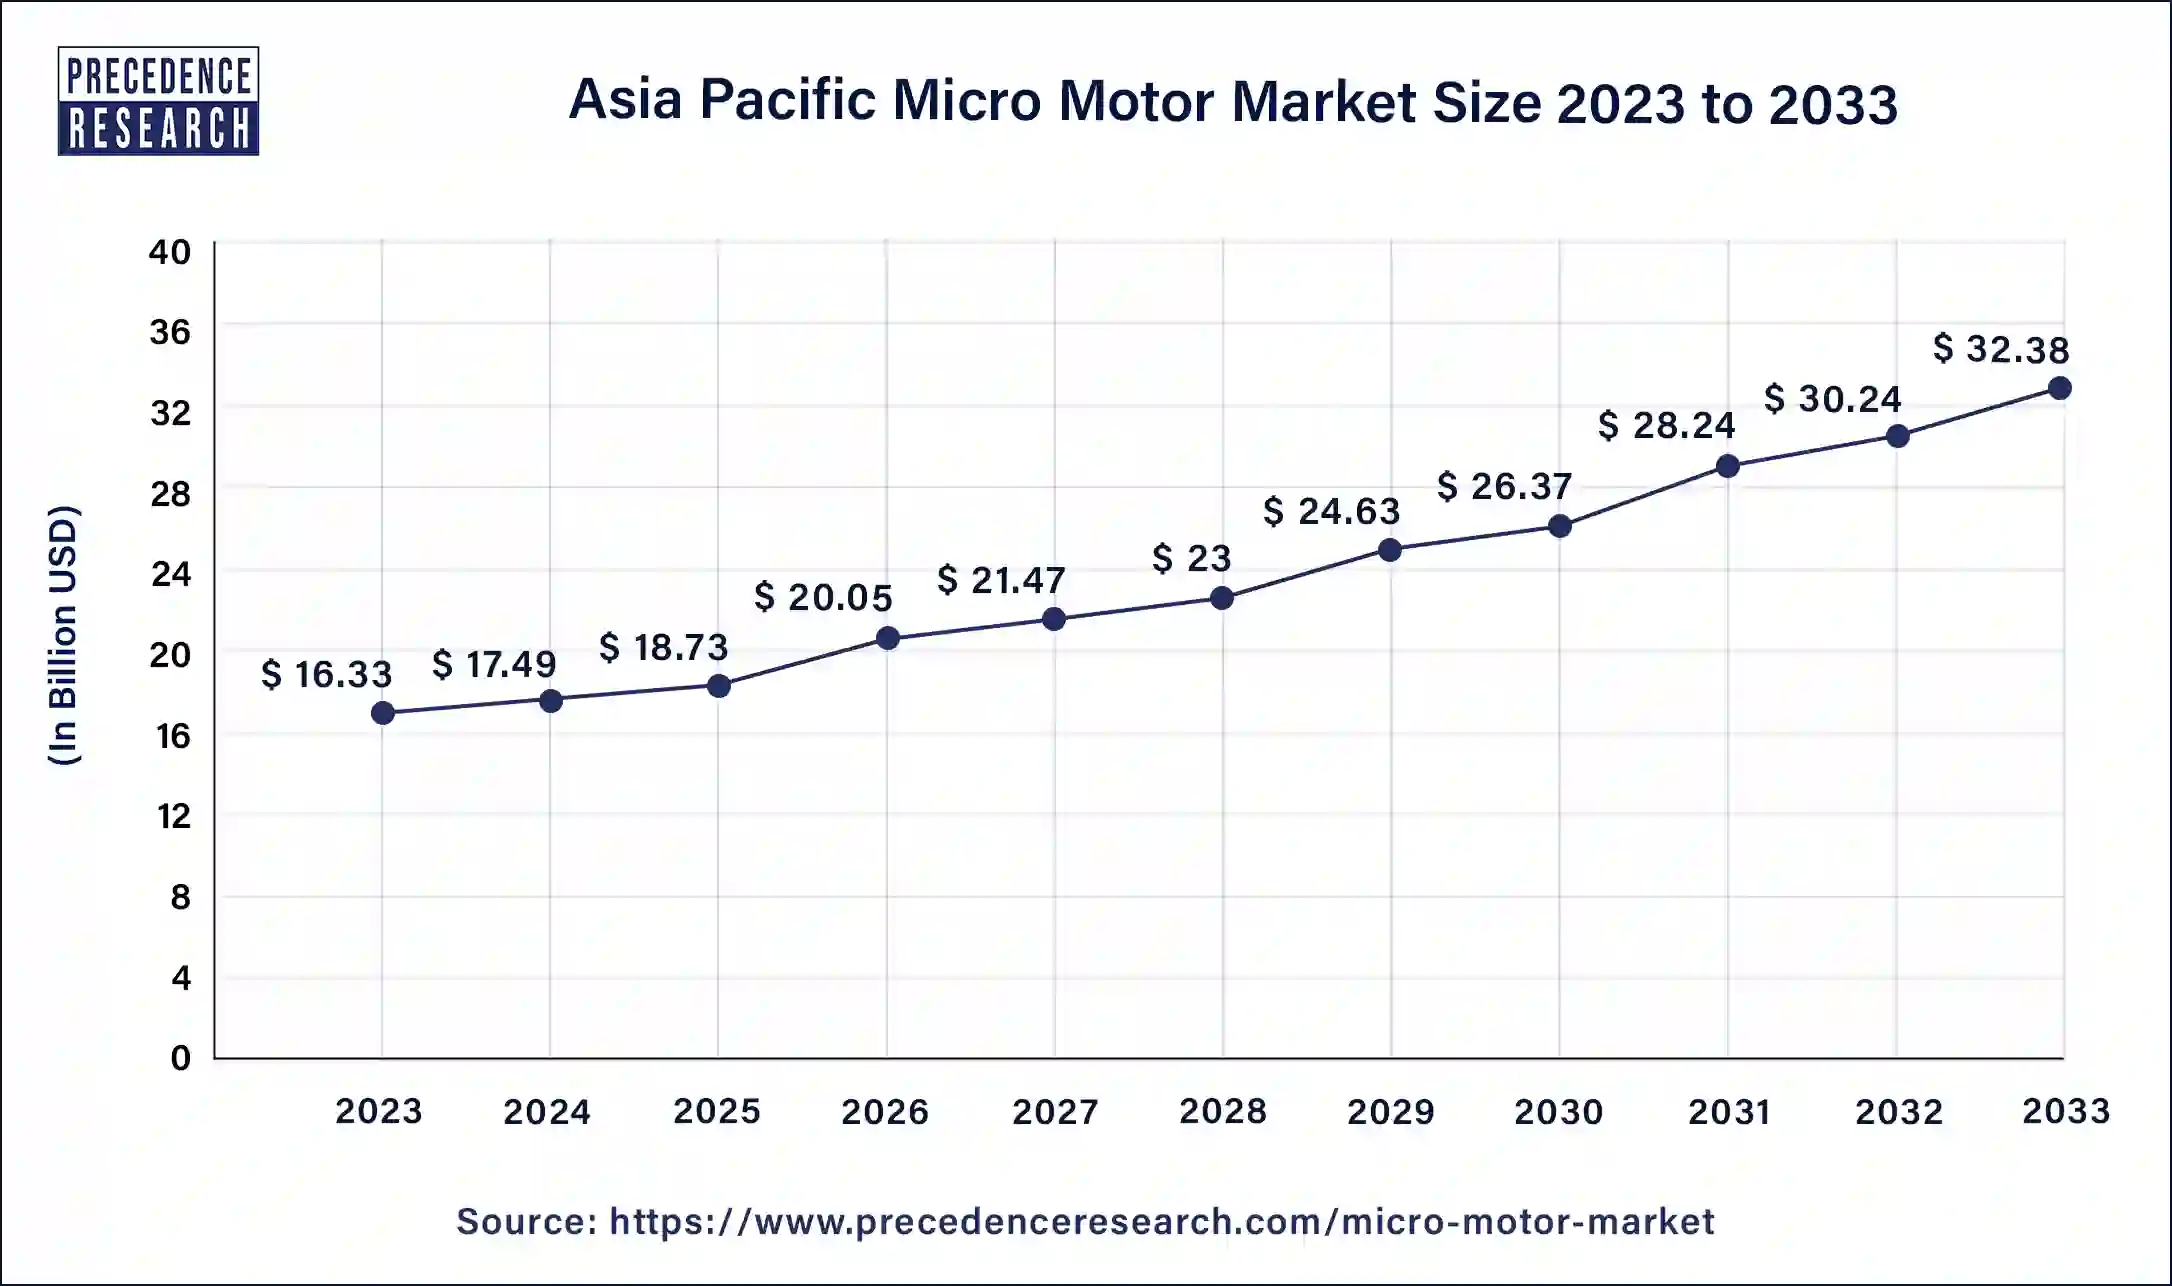 Asia Pacific Micro Motor Market Size 2024 to 2033